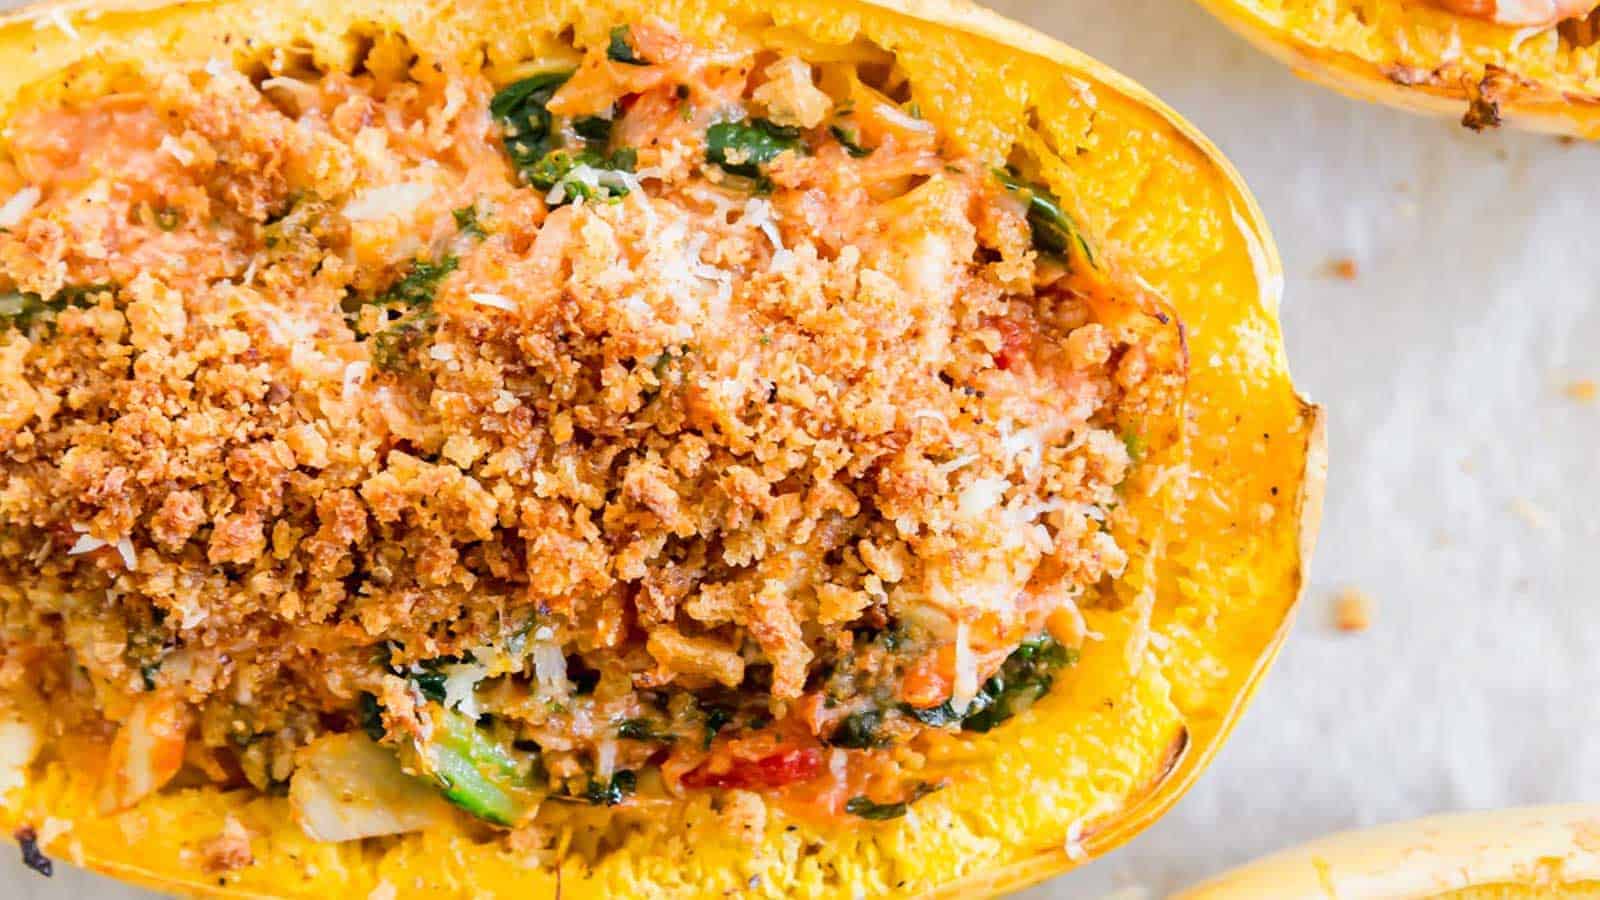 Twice baked spaghetti squash with breadcrumb topping.